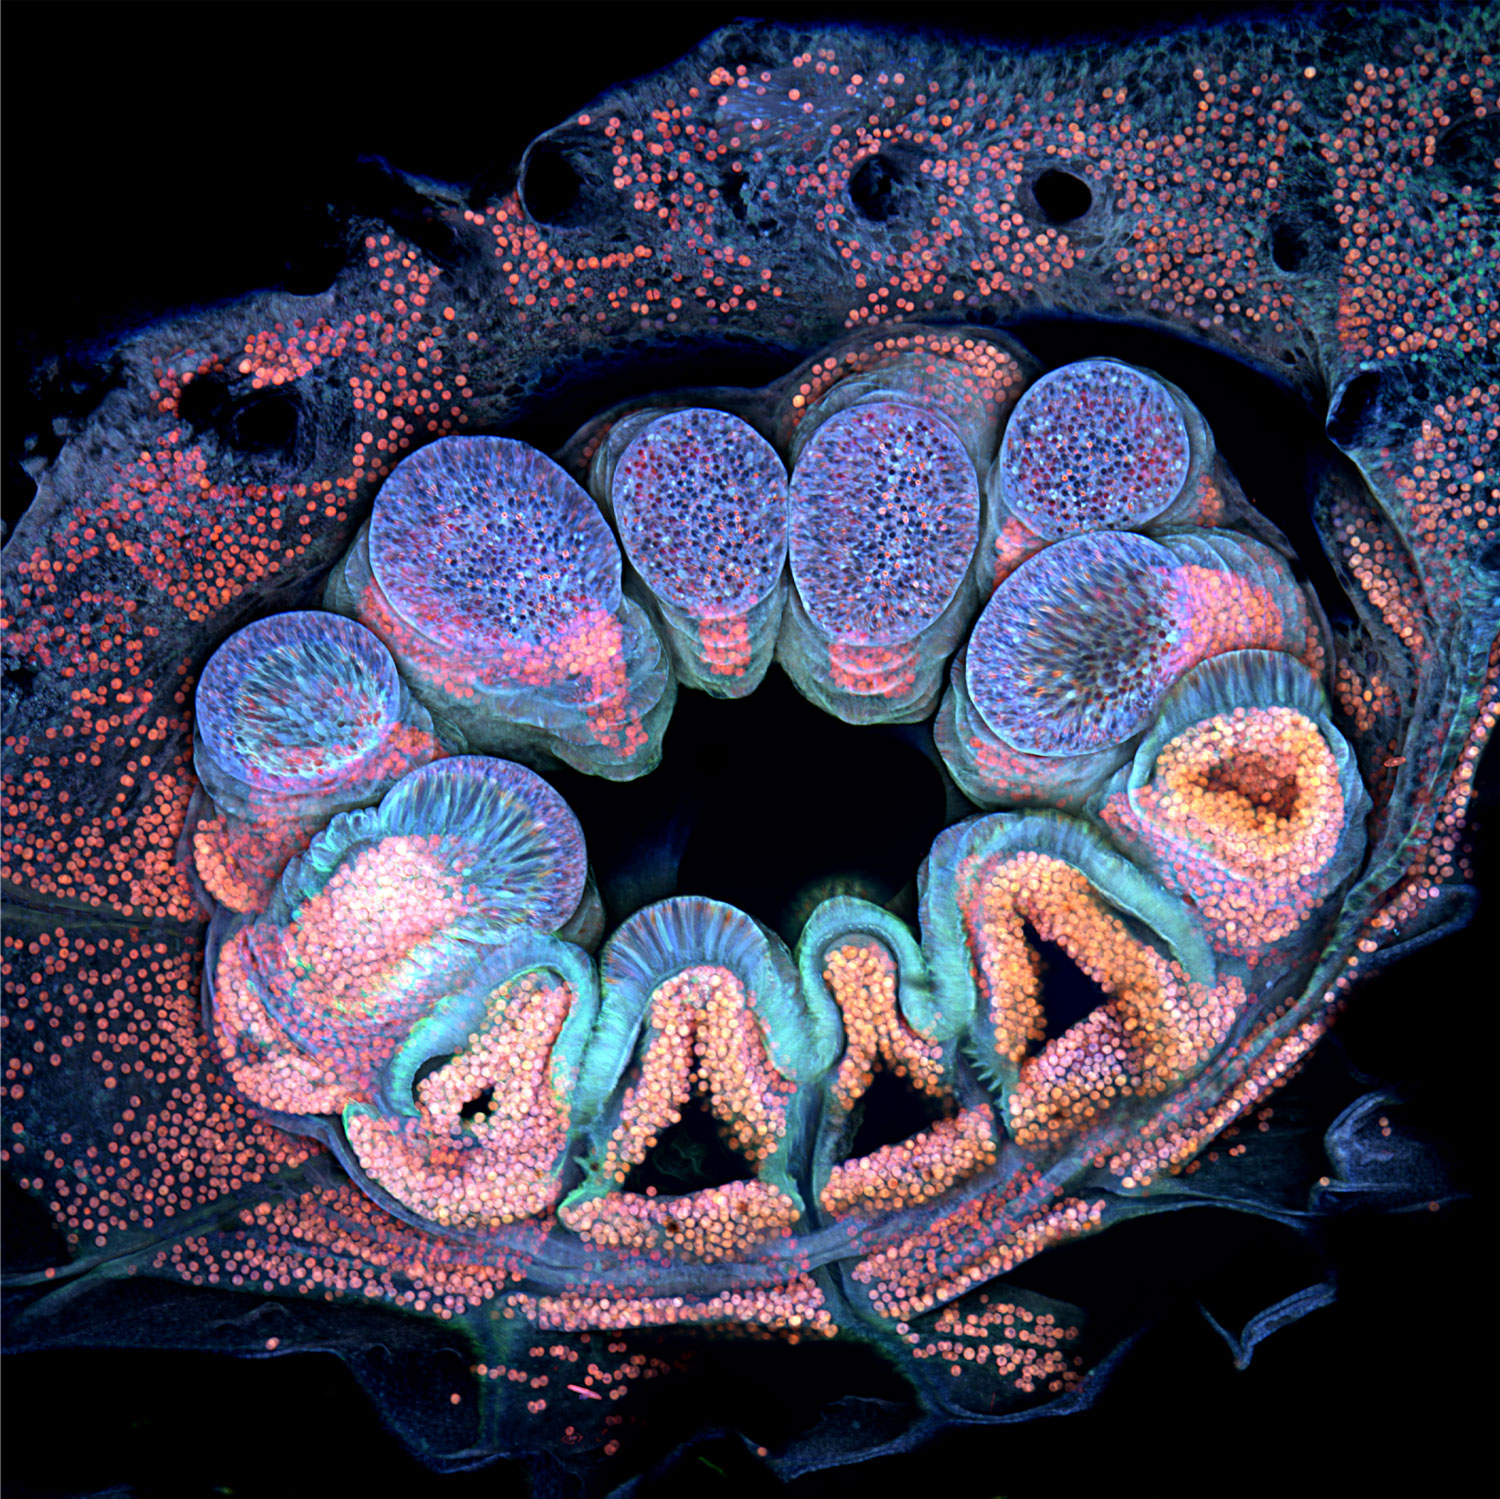 a coral polyp, shown fluorescent in blue, pink and purple, resembling a ring of teeth or similar structures, against a black background